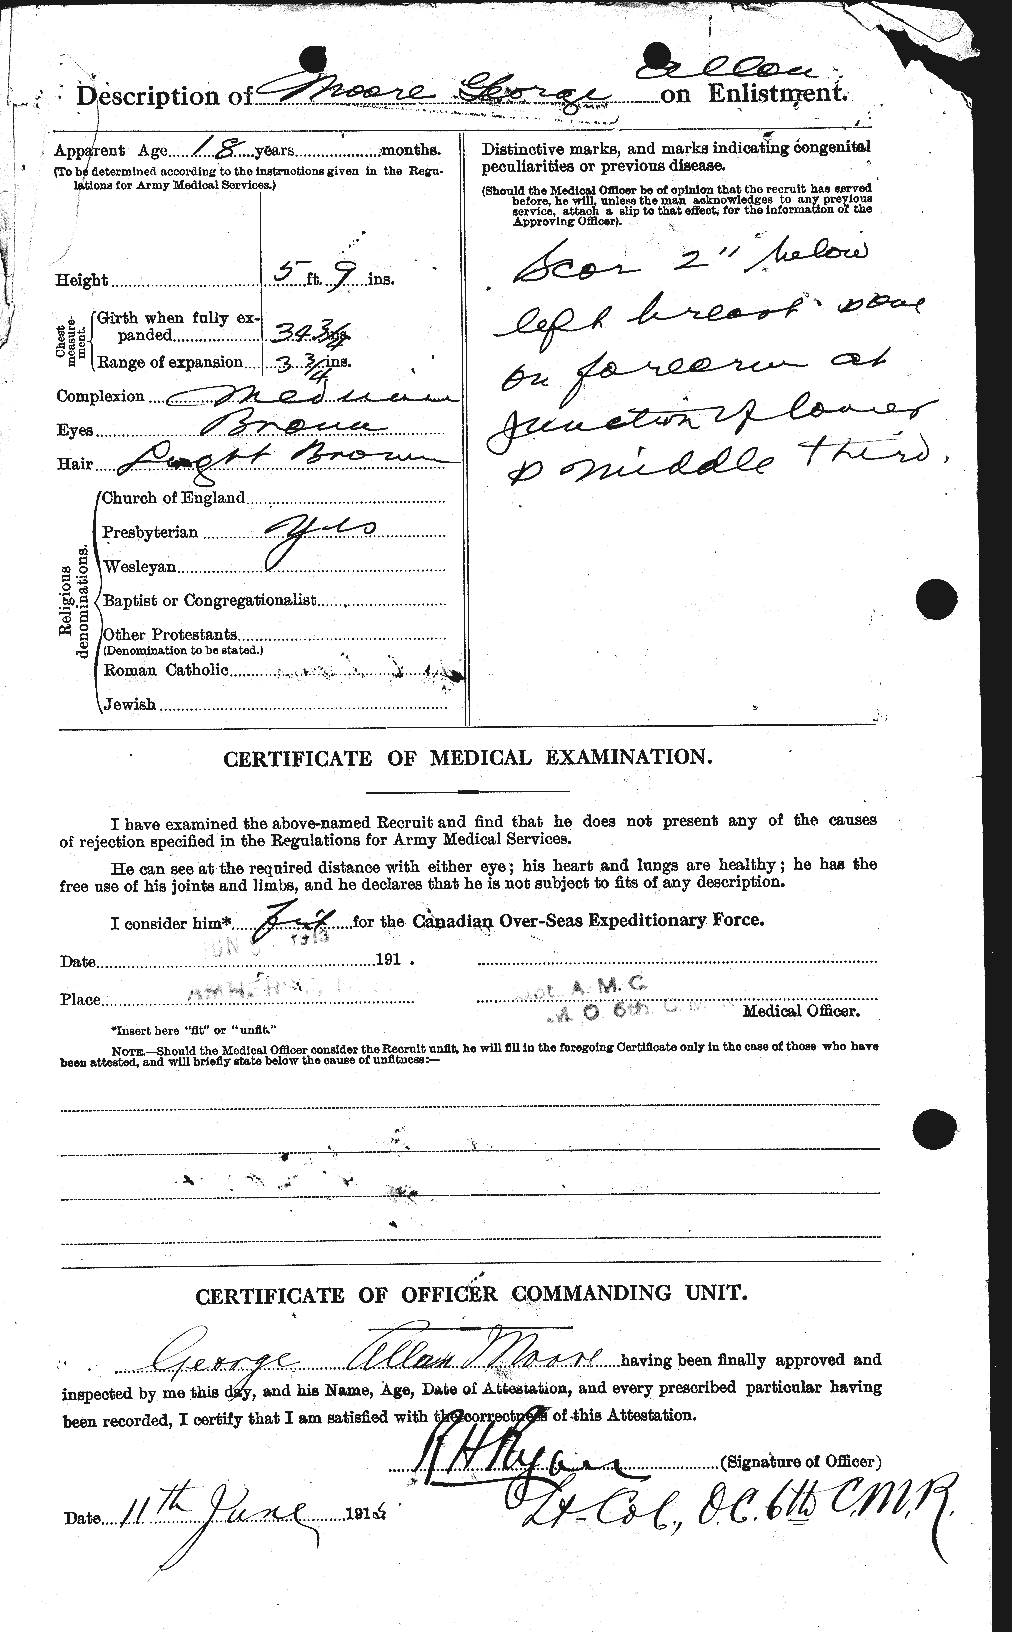 Personnel Records of the First World War - CEF 501983b